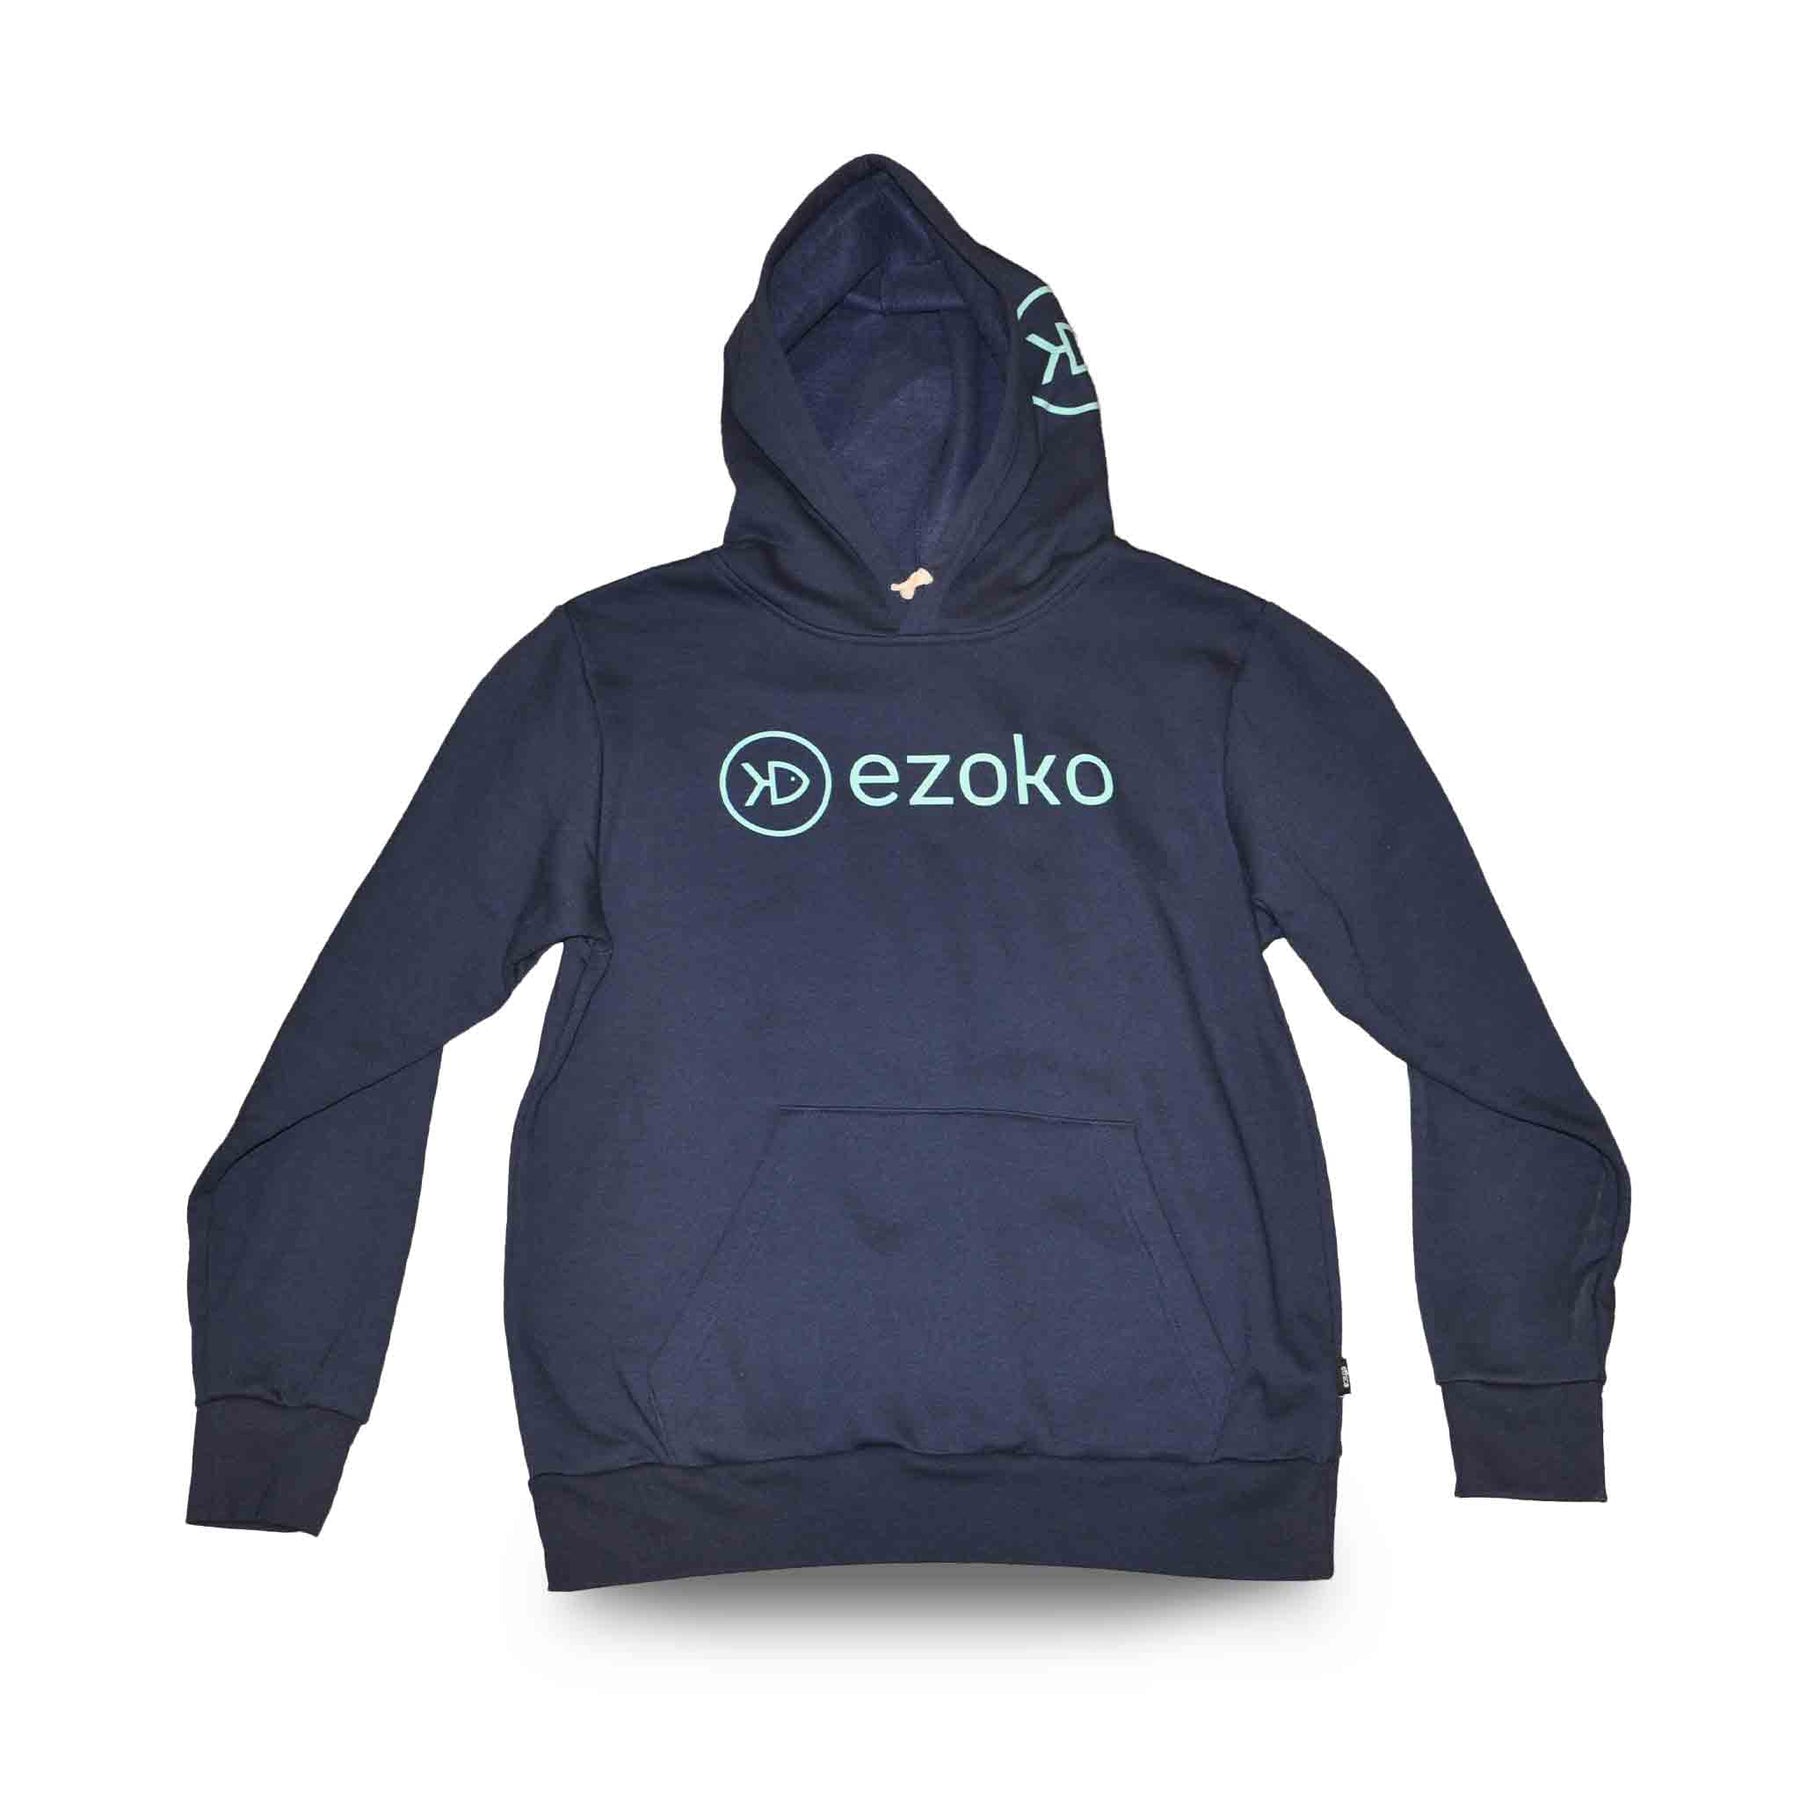 Front view of navy blue ezoko hoodie with green ezoko logo on the chest